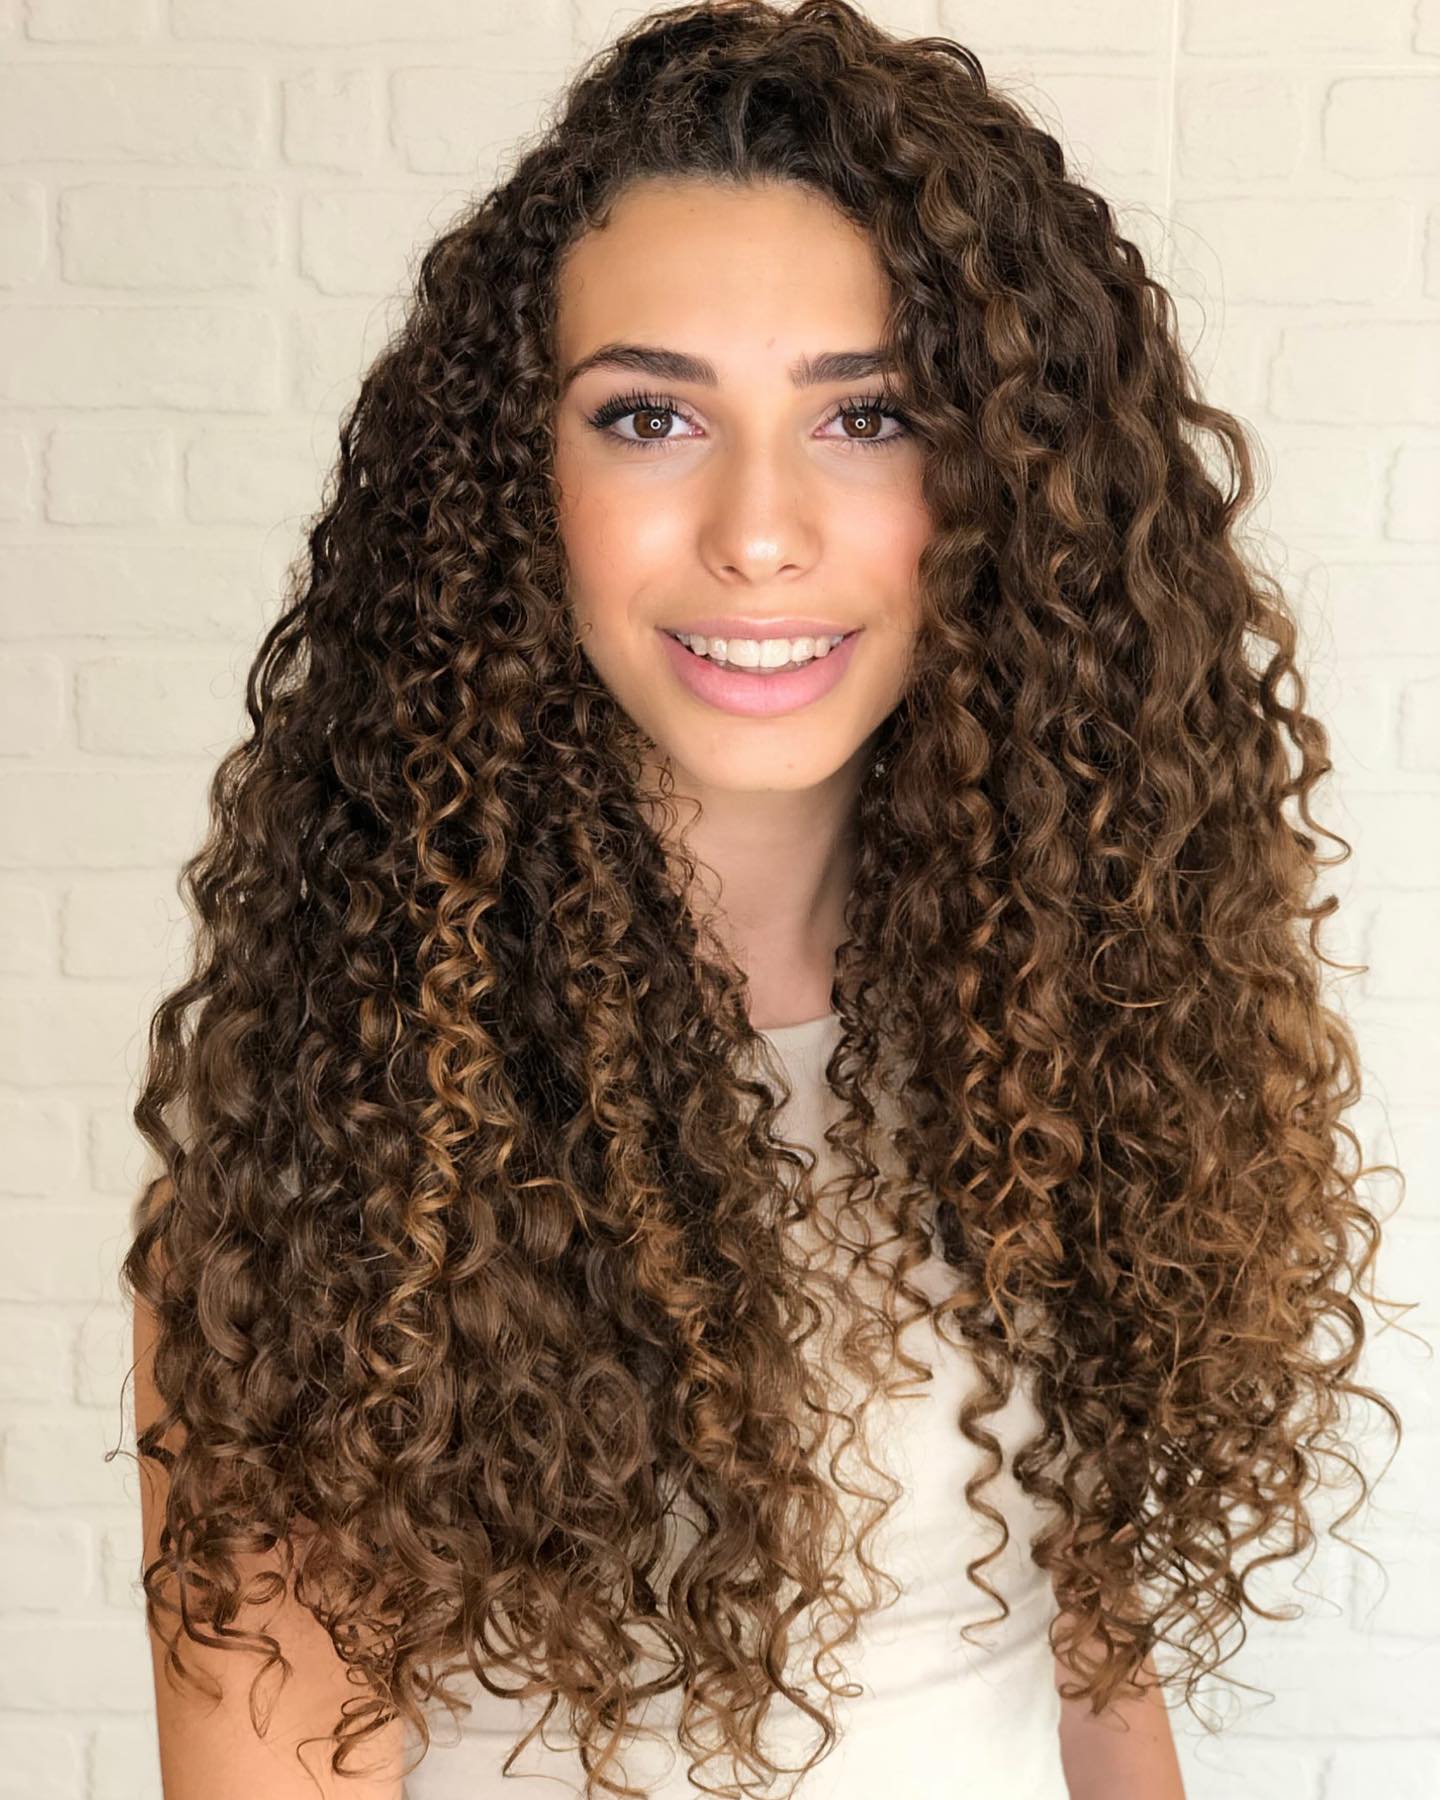 30 Top Long Hairstyles for Women to Keep up with Trends in 2023